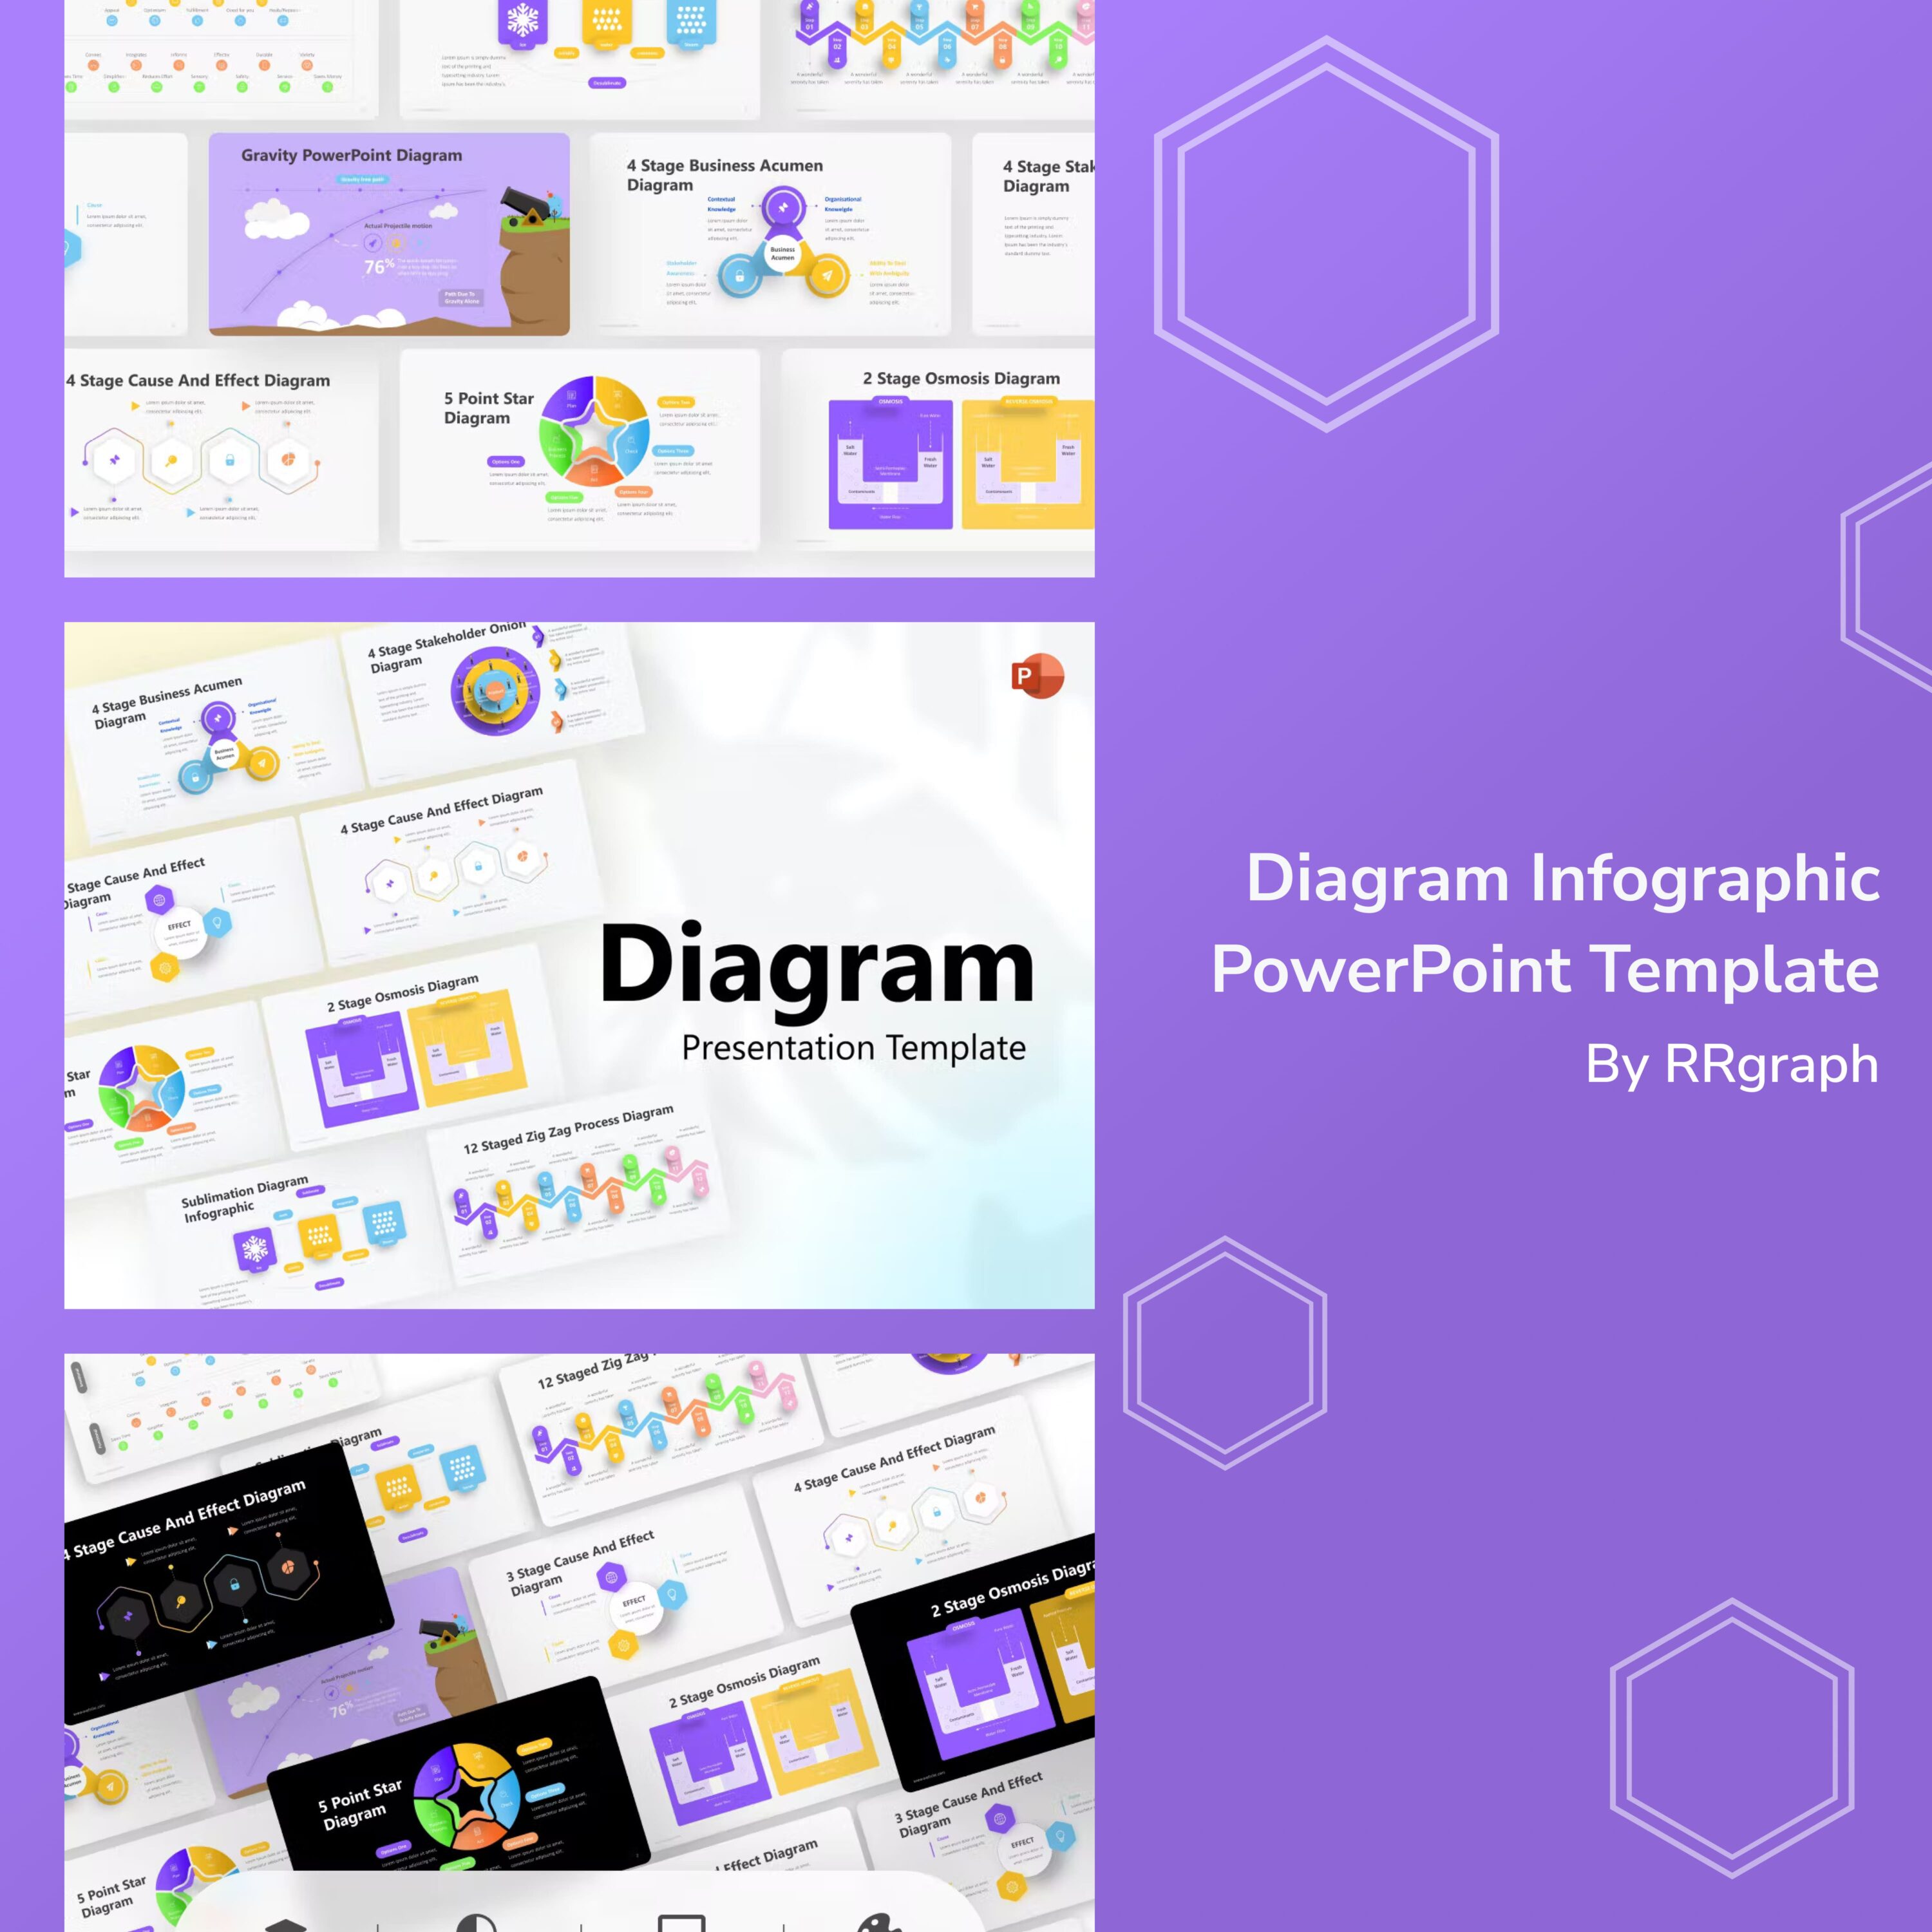 Diagram Infographic PowerPoint Template.